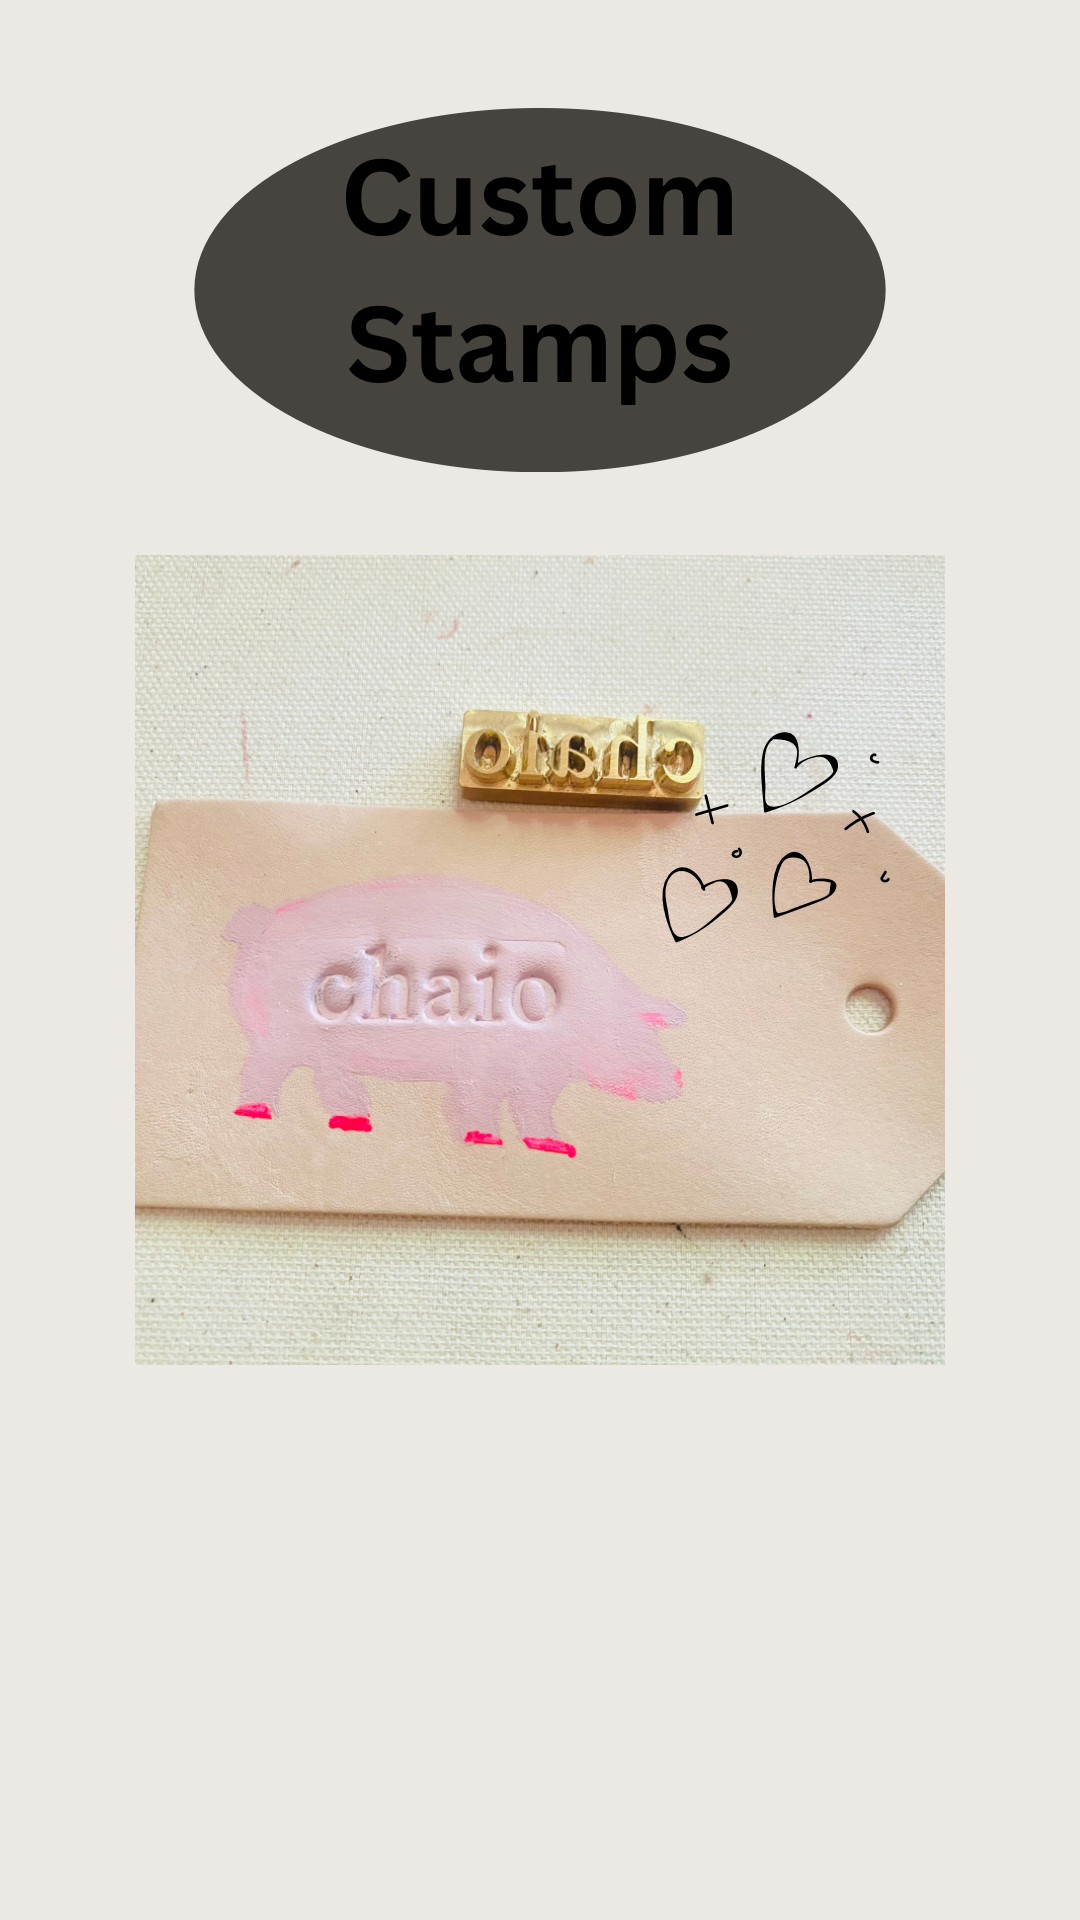 Gift Tags for birthdays, holidays and DIY - Chaio Leather Goods